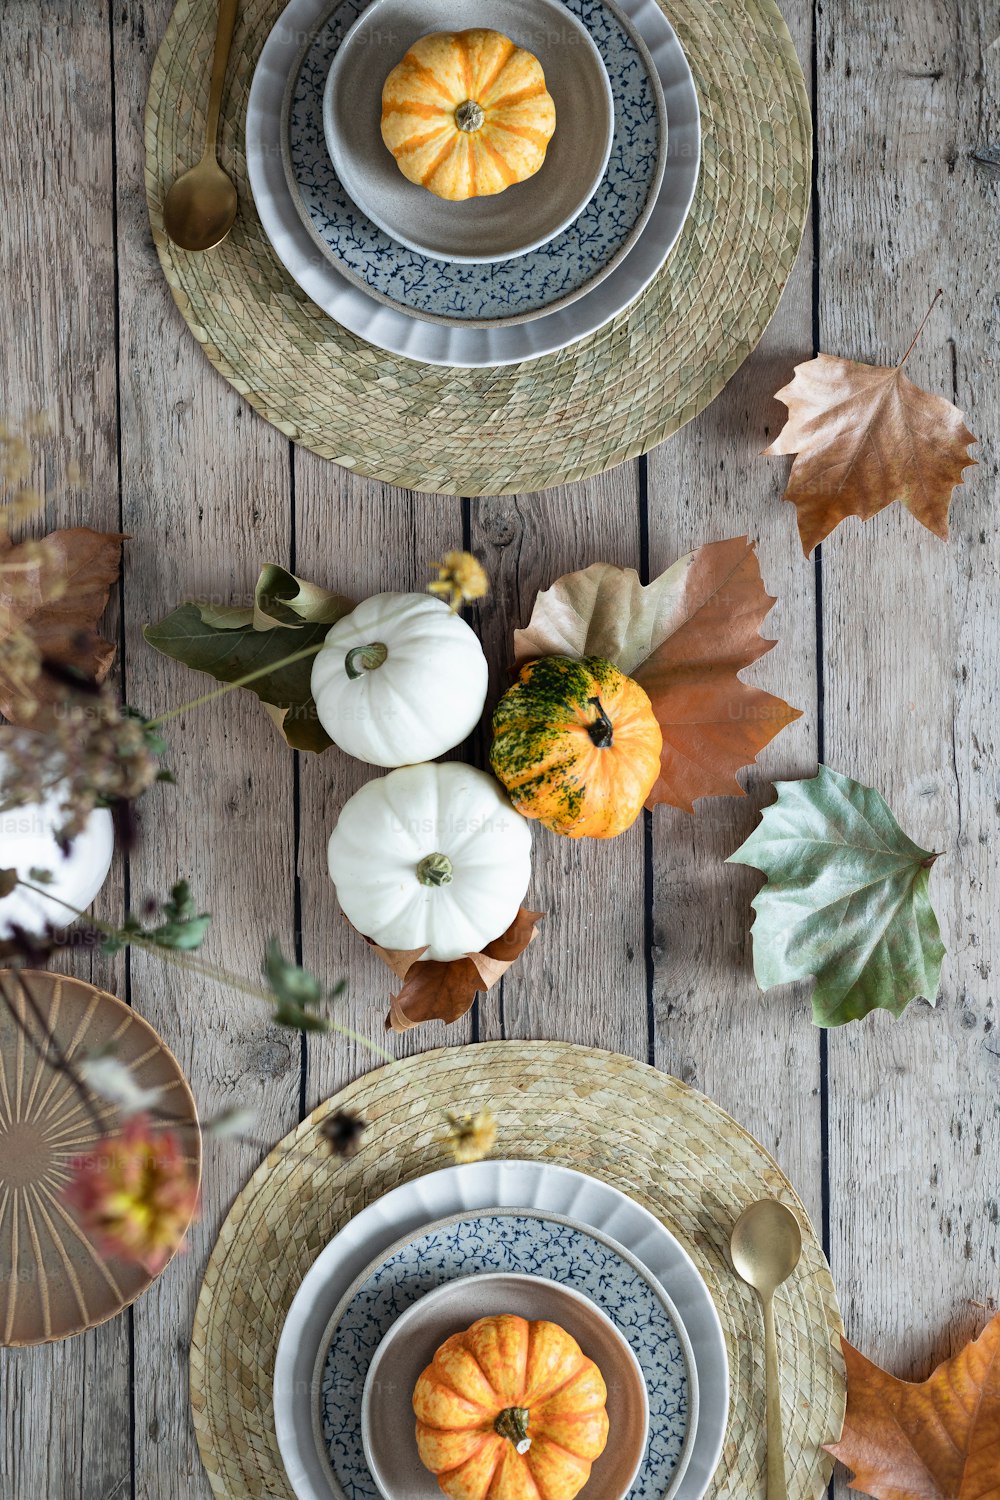 a wooden table topped with plates and bowls filled with pumpkins